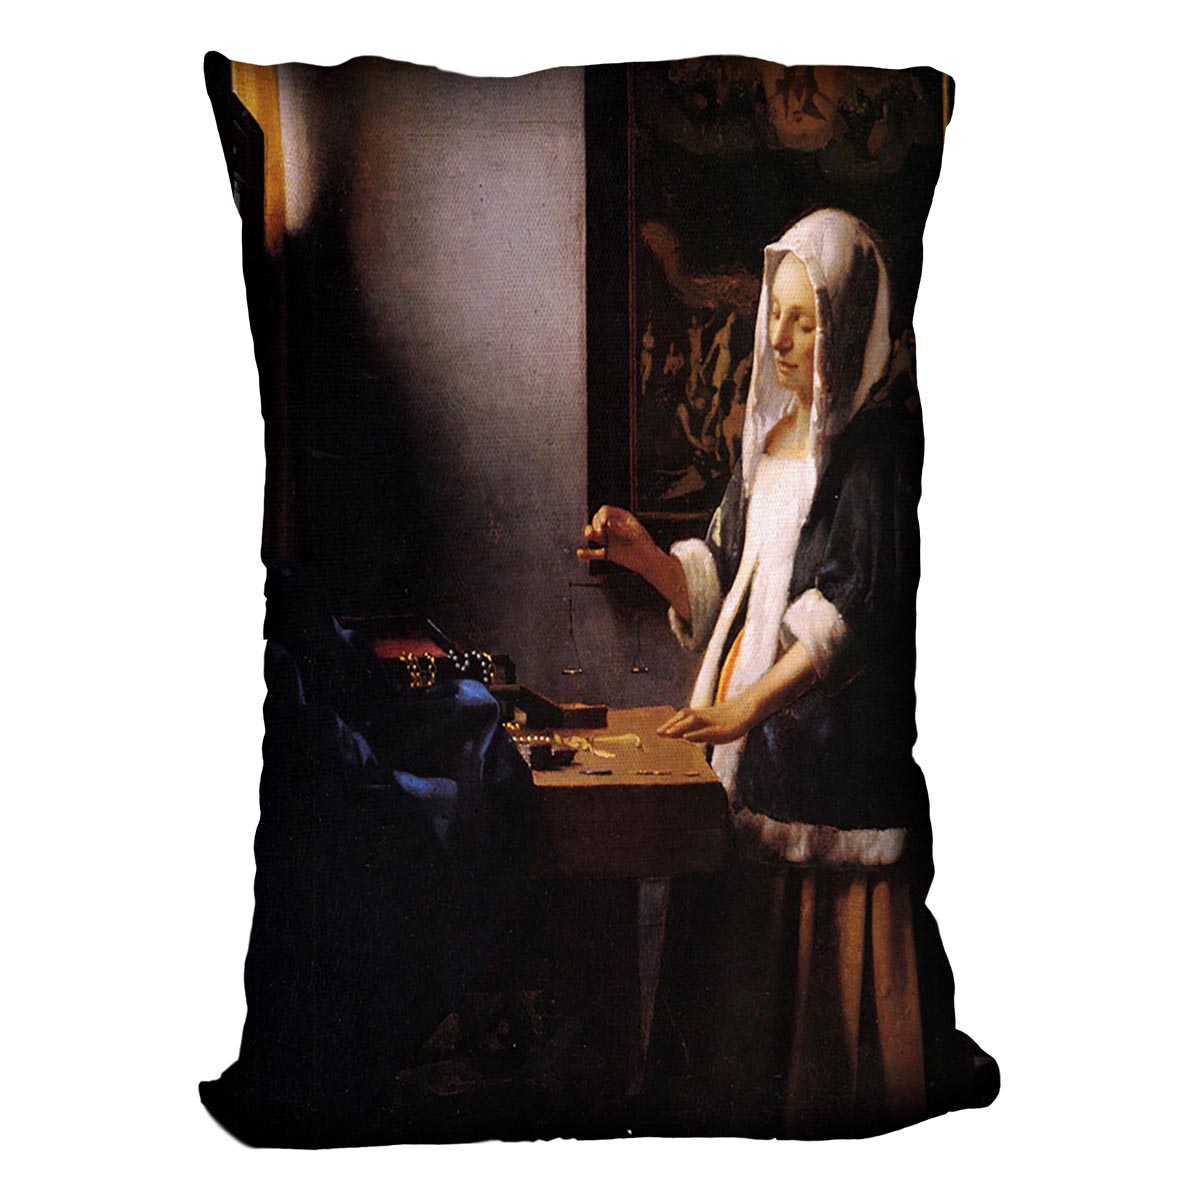 Weights by Vermeer Cushion